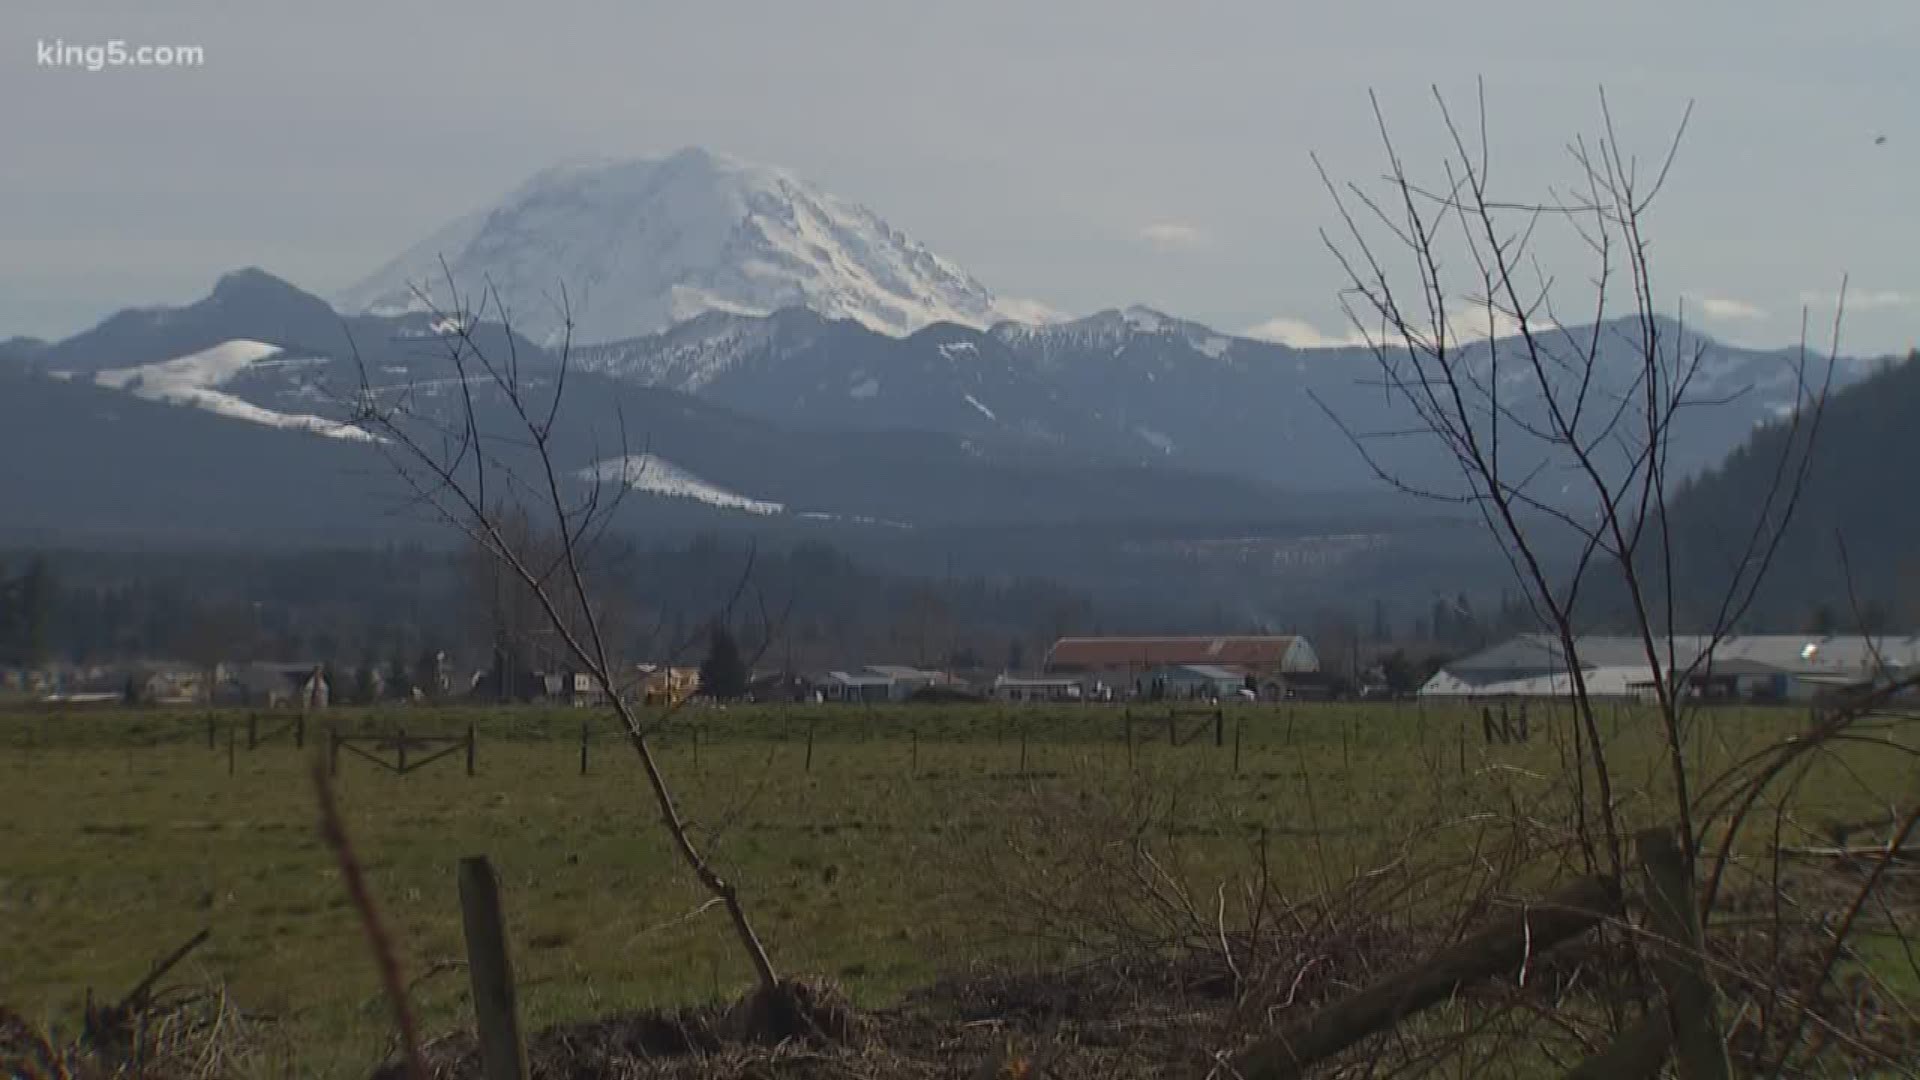 There are several fast moving developments, including an FBI request and a call for a review of more than 100 special purpose districts in King County. KING 5 Investigator Chris Ingalls has the details.